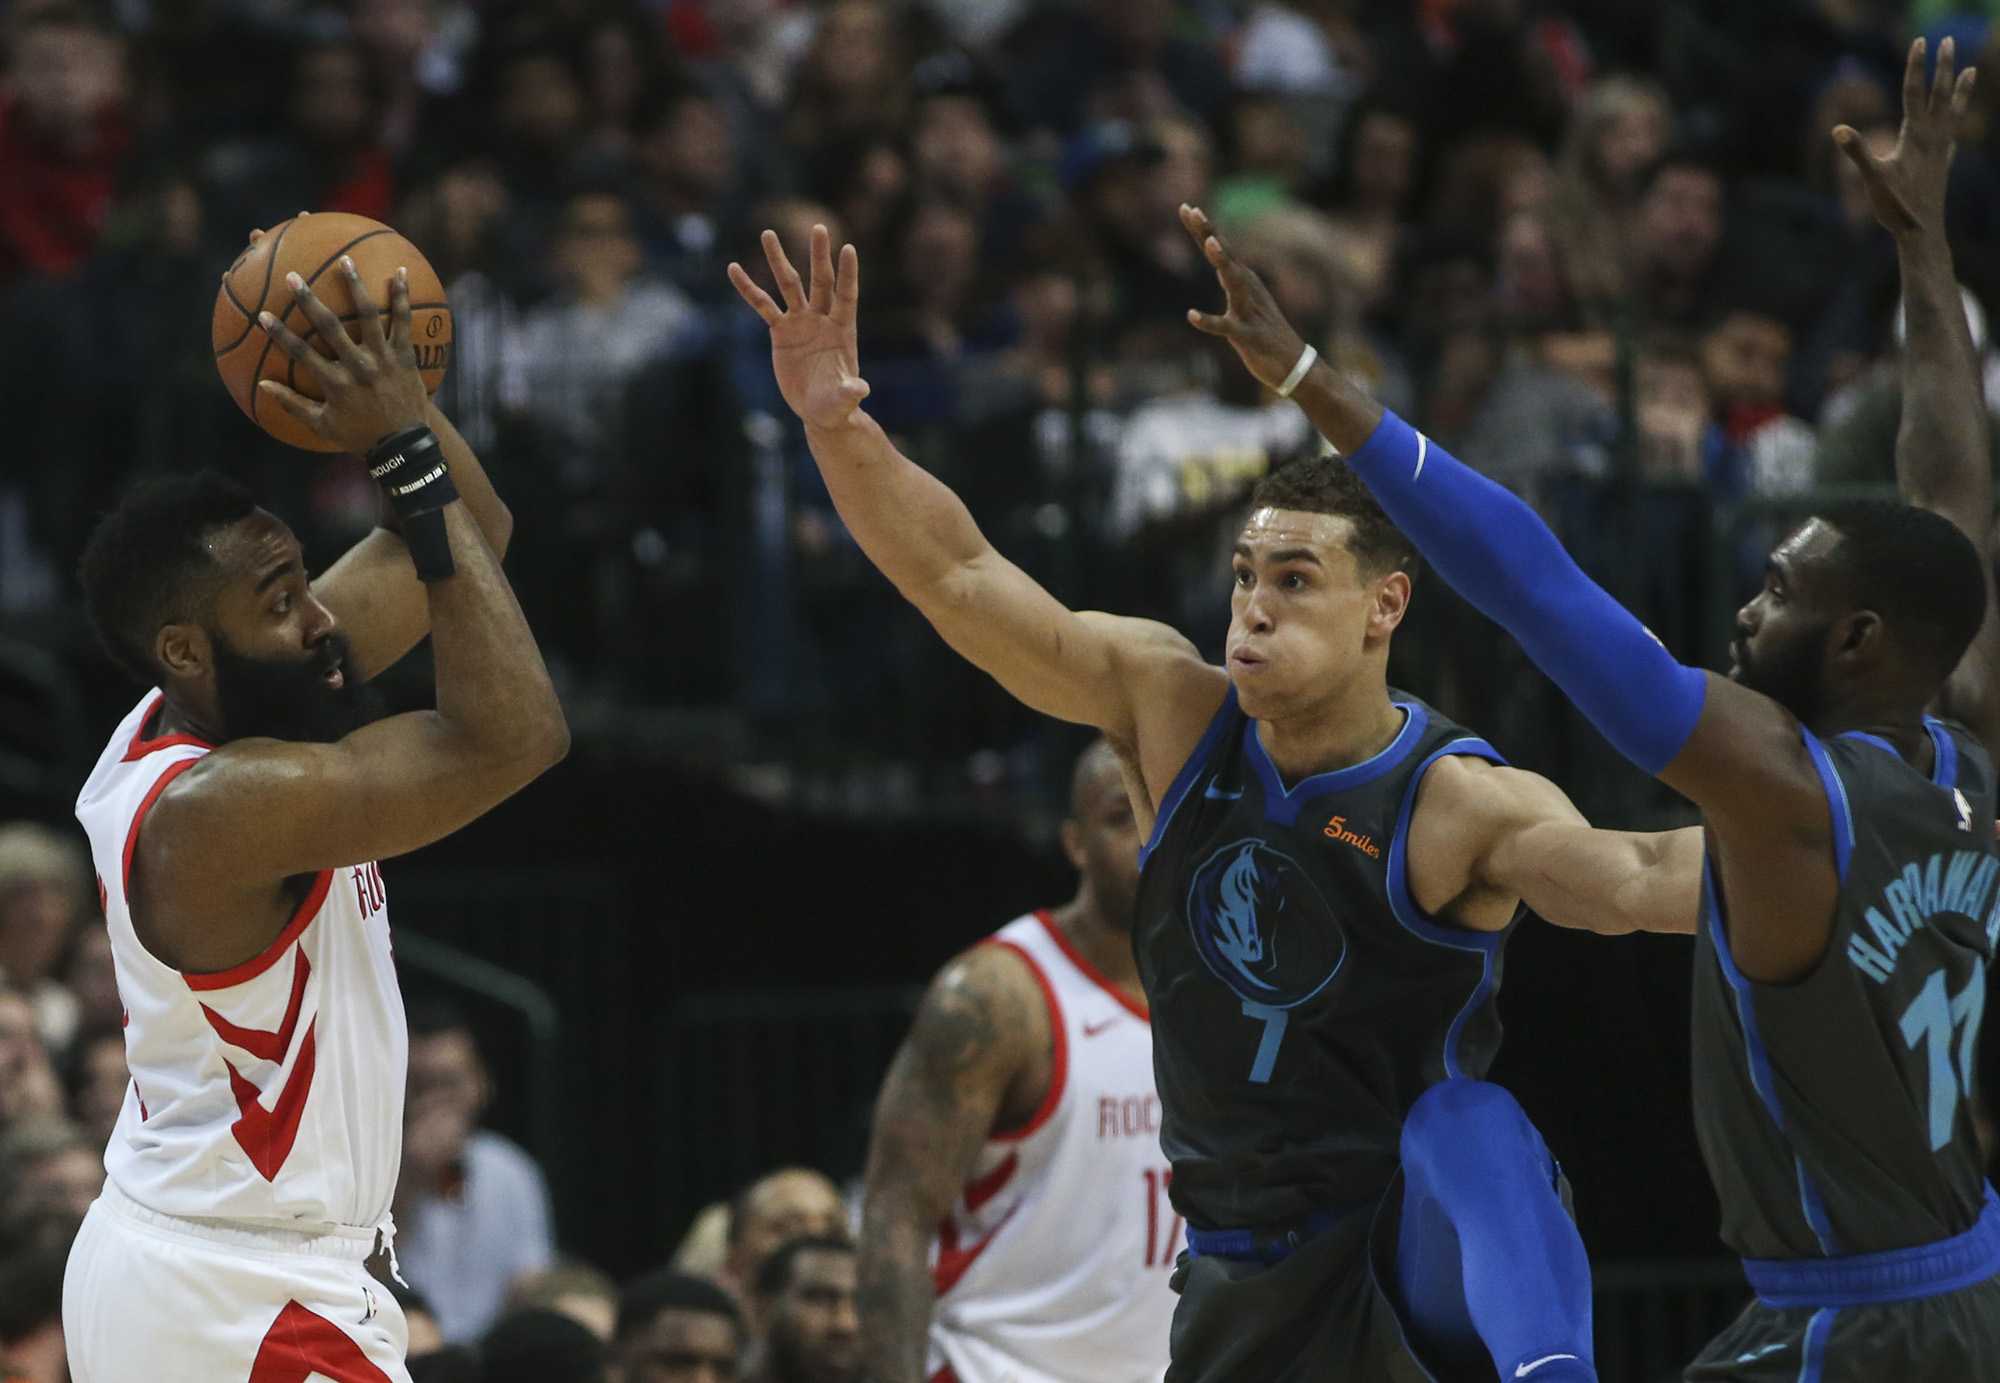 Dallas Mavericks forward Dwight Powell (7) and guard Tim Hardaway Jr. (11) work to stop Houston Rockets guard James Harden (13) during the first half on Sunday, March 10, 2019 at the American Airlines Center in Dallas, Texas. (Ryan Michalesko/Dallas Morning News/TNS)